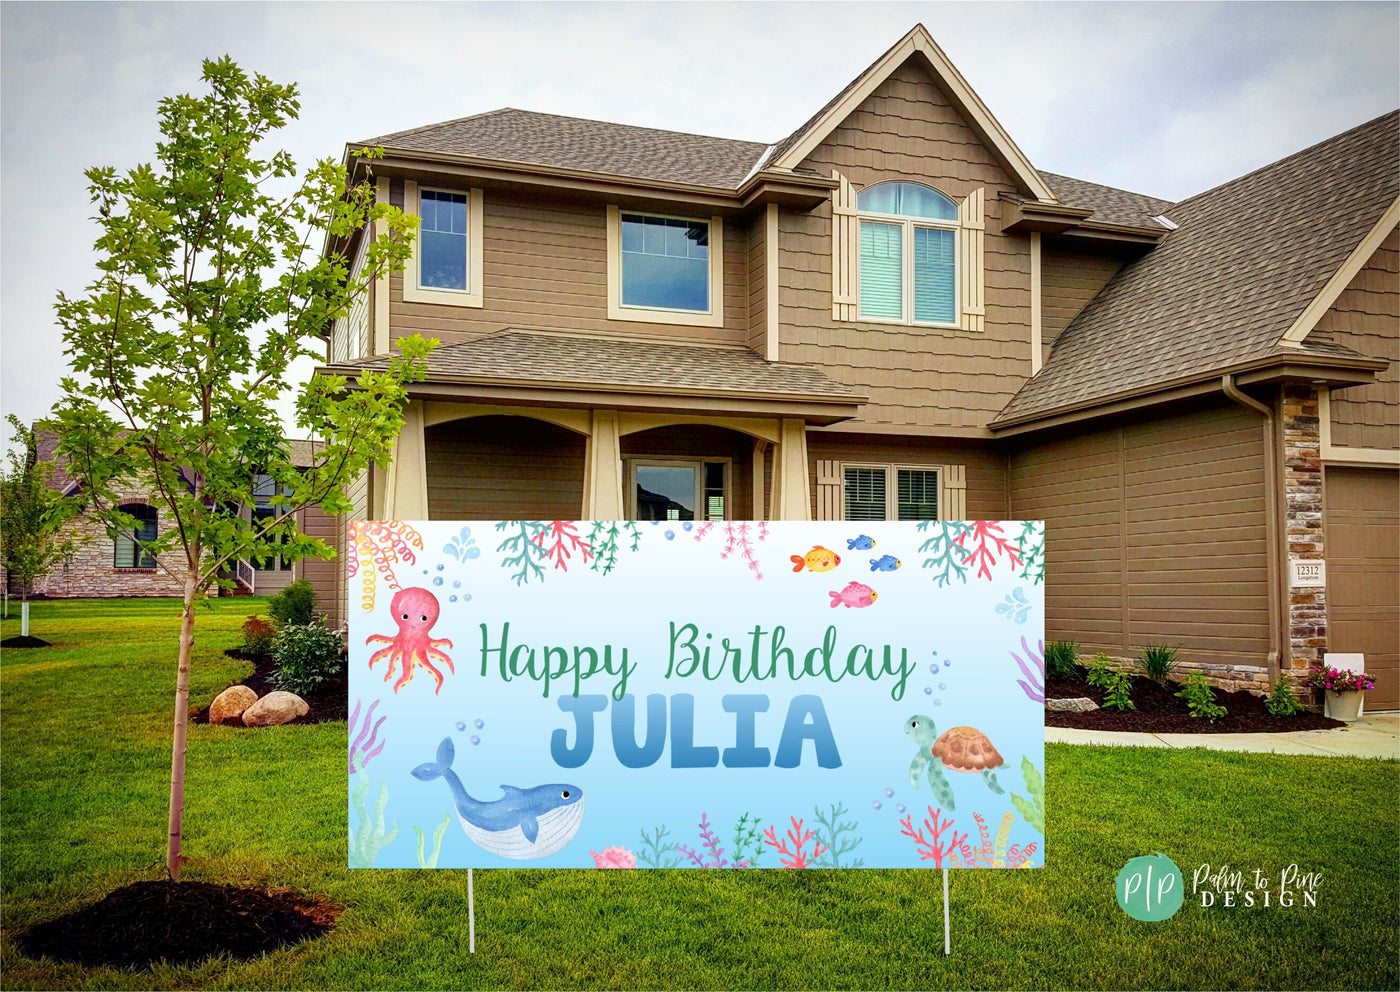 Under the sea party decorations, Under the Sea Birthday Banner, Under the sea backdrop, Under the sea banner, Ocean birthday banner, Sealife